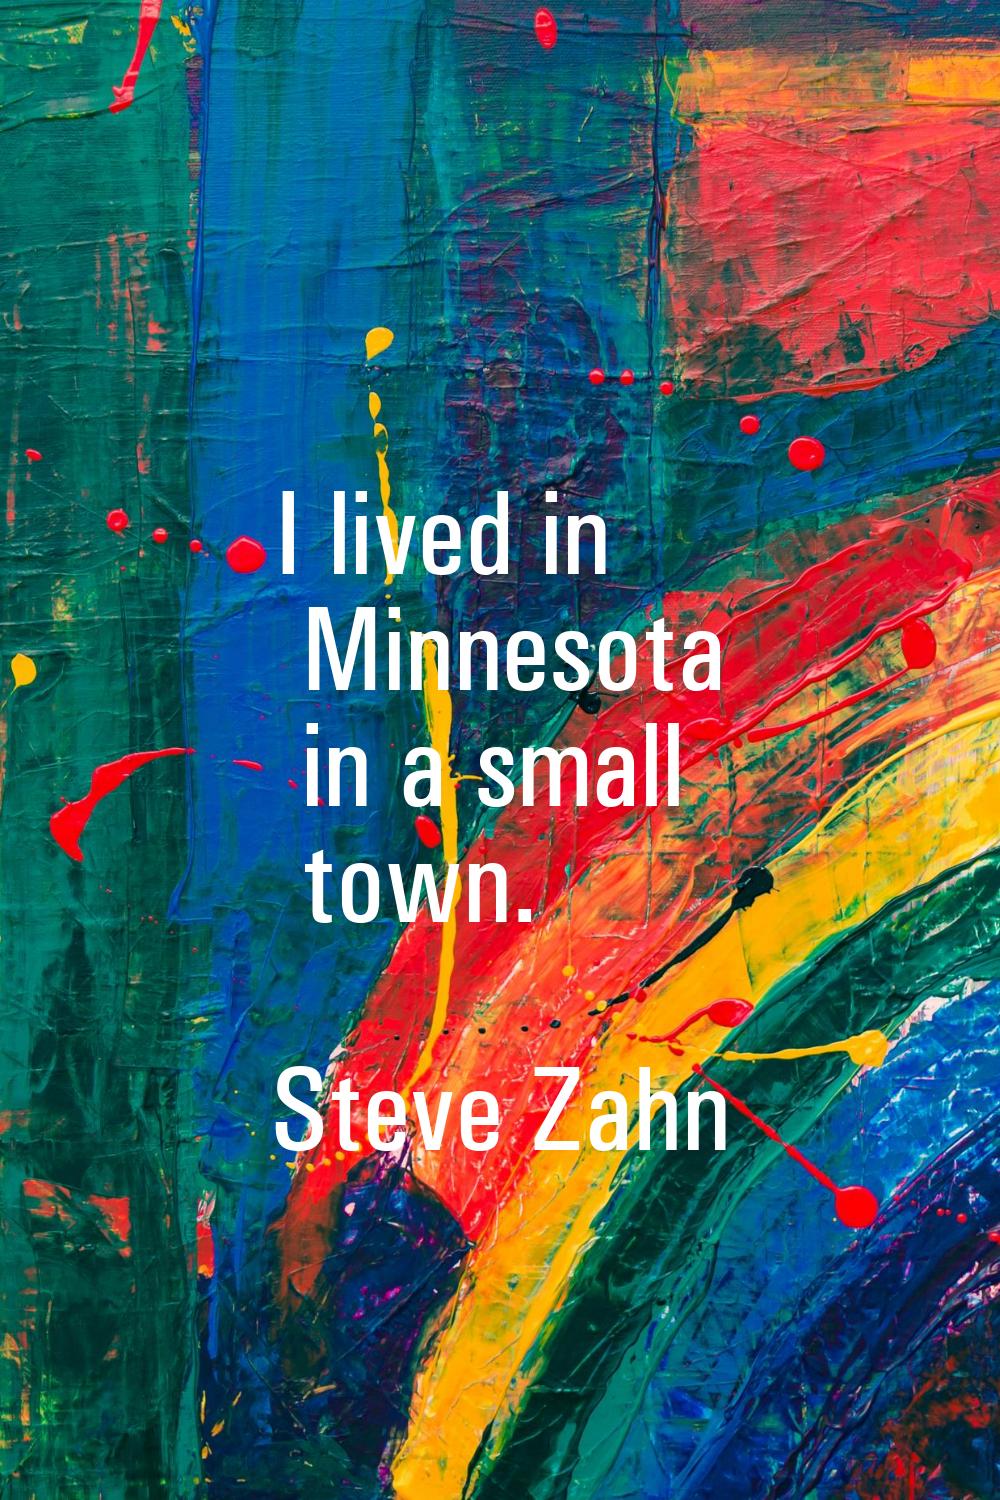 I lived in Minnesota in a small town.